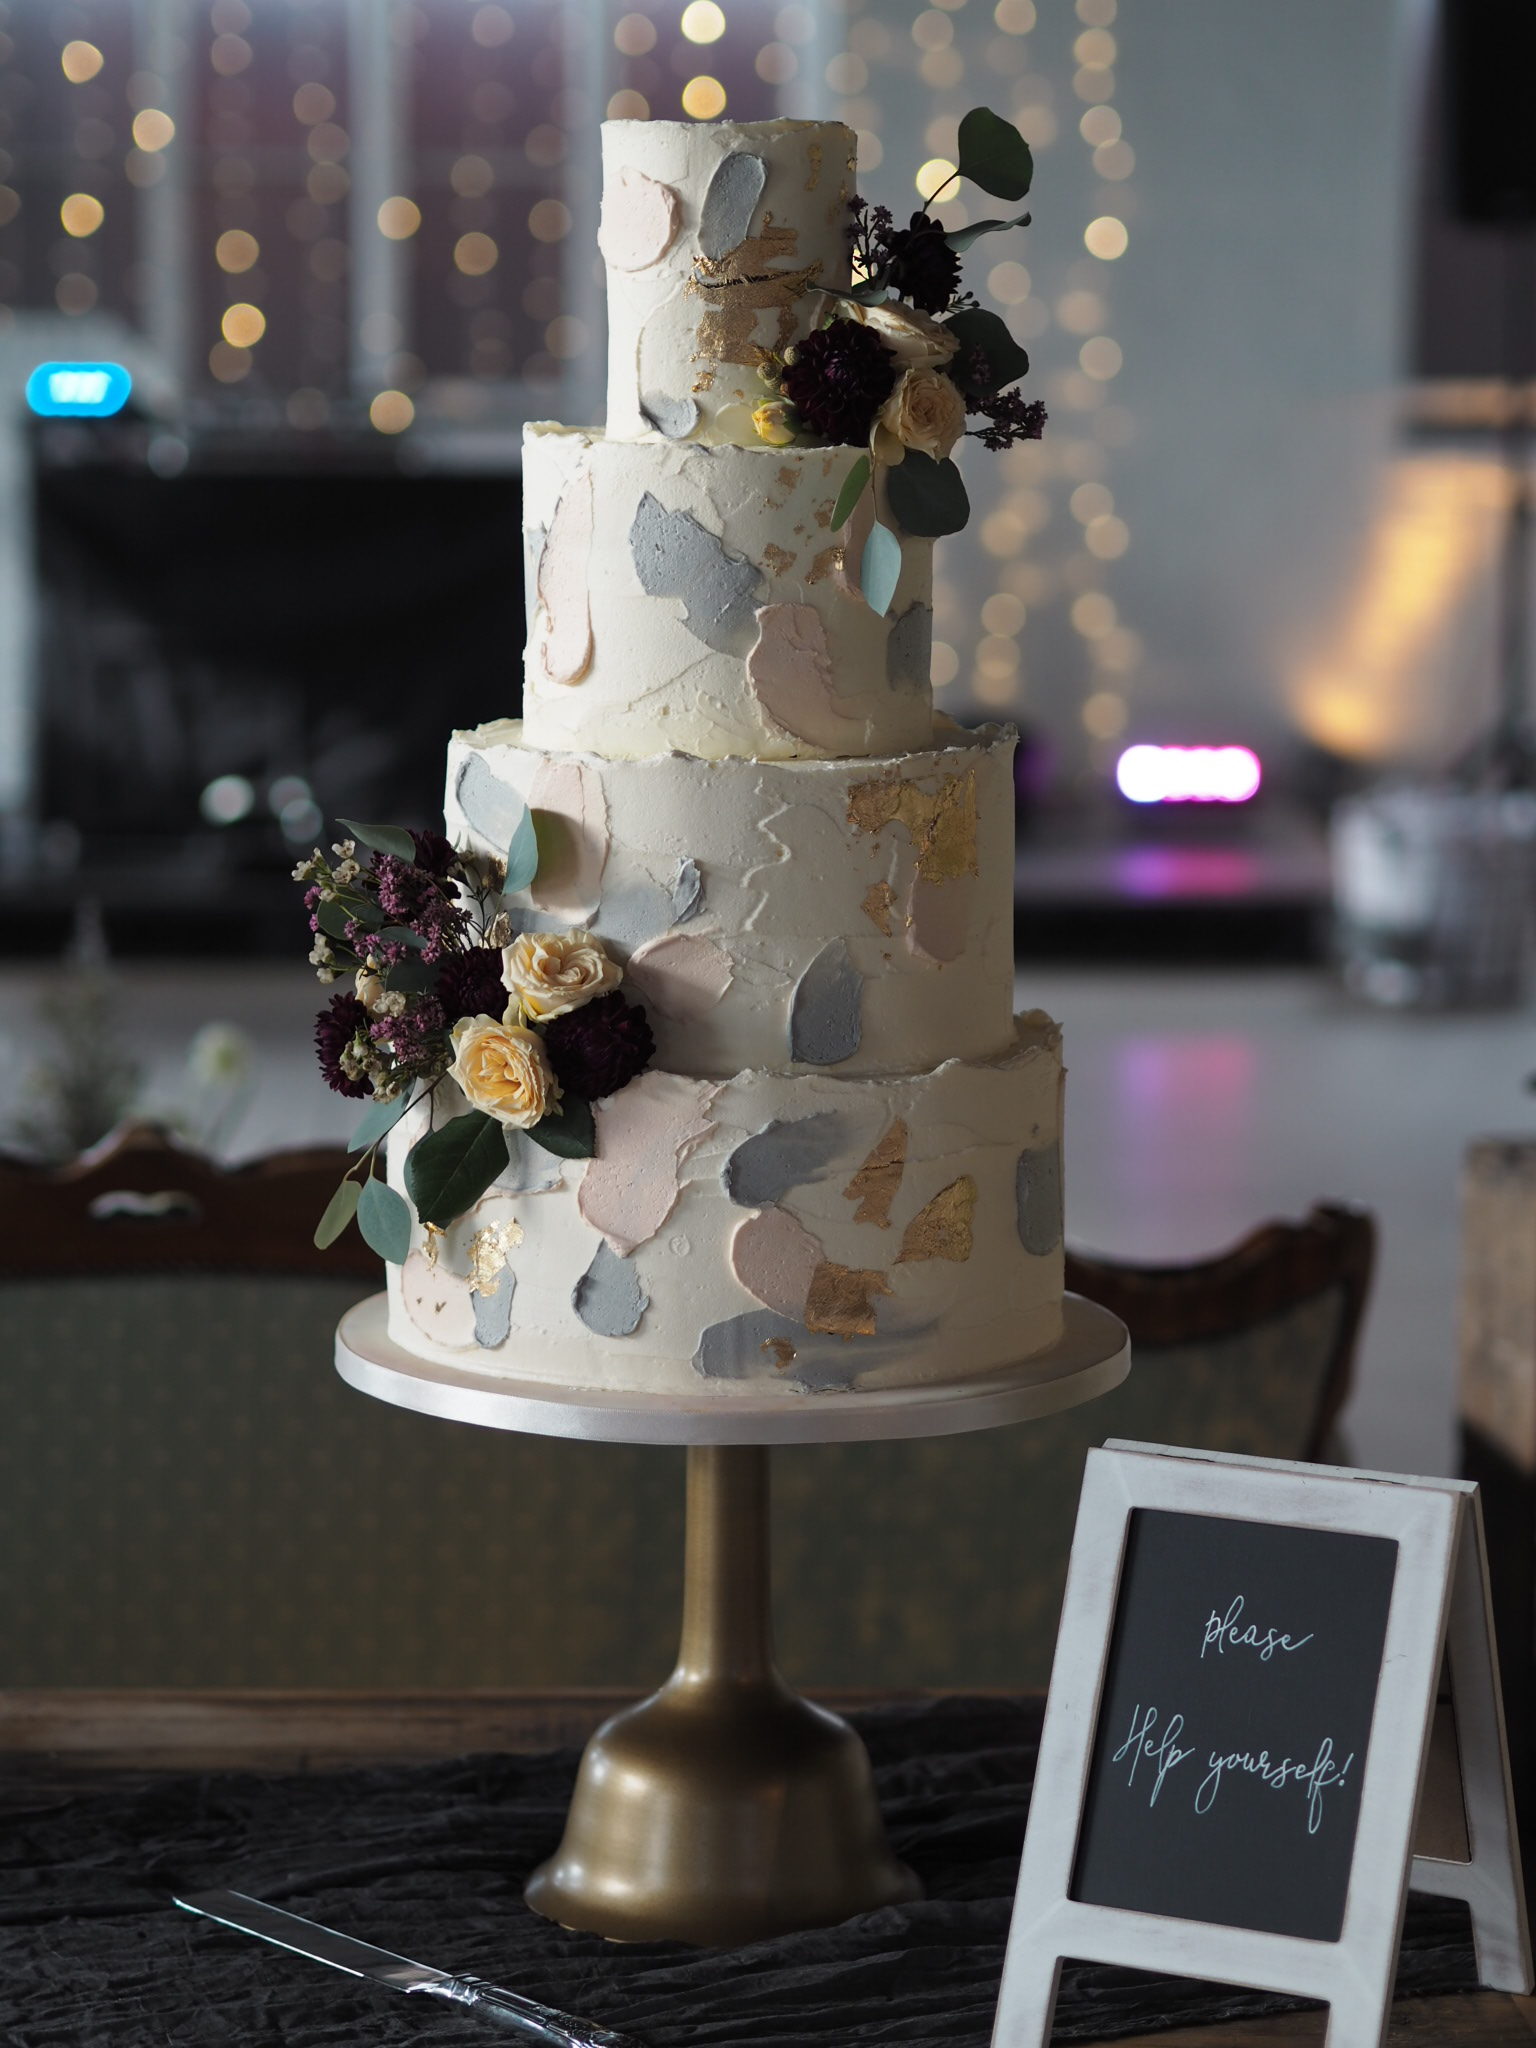 a 4 tier buttercream wedding cake with painted brushstrokes in blush and grey with edible gold leaf and 2 statement flowers arrangements at the chainstore trinity buoy wharf wedding venue east london